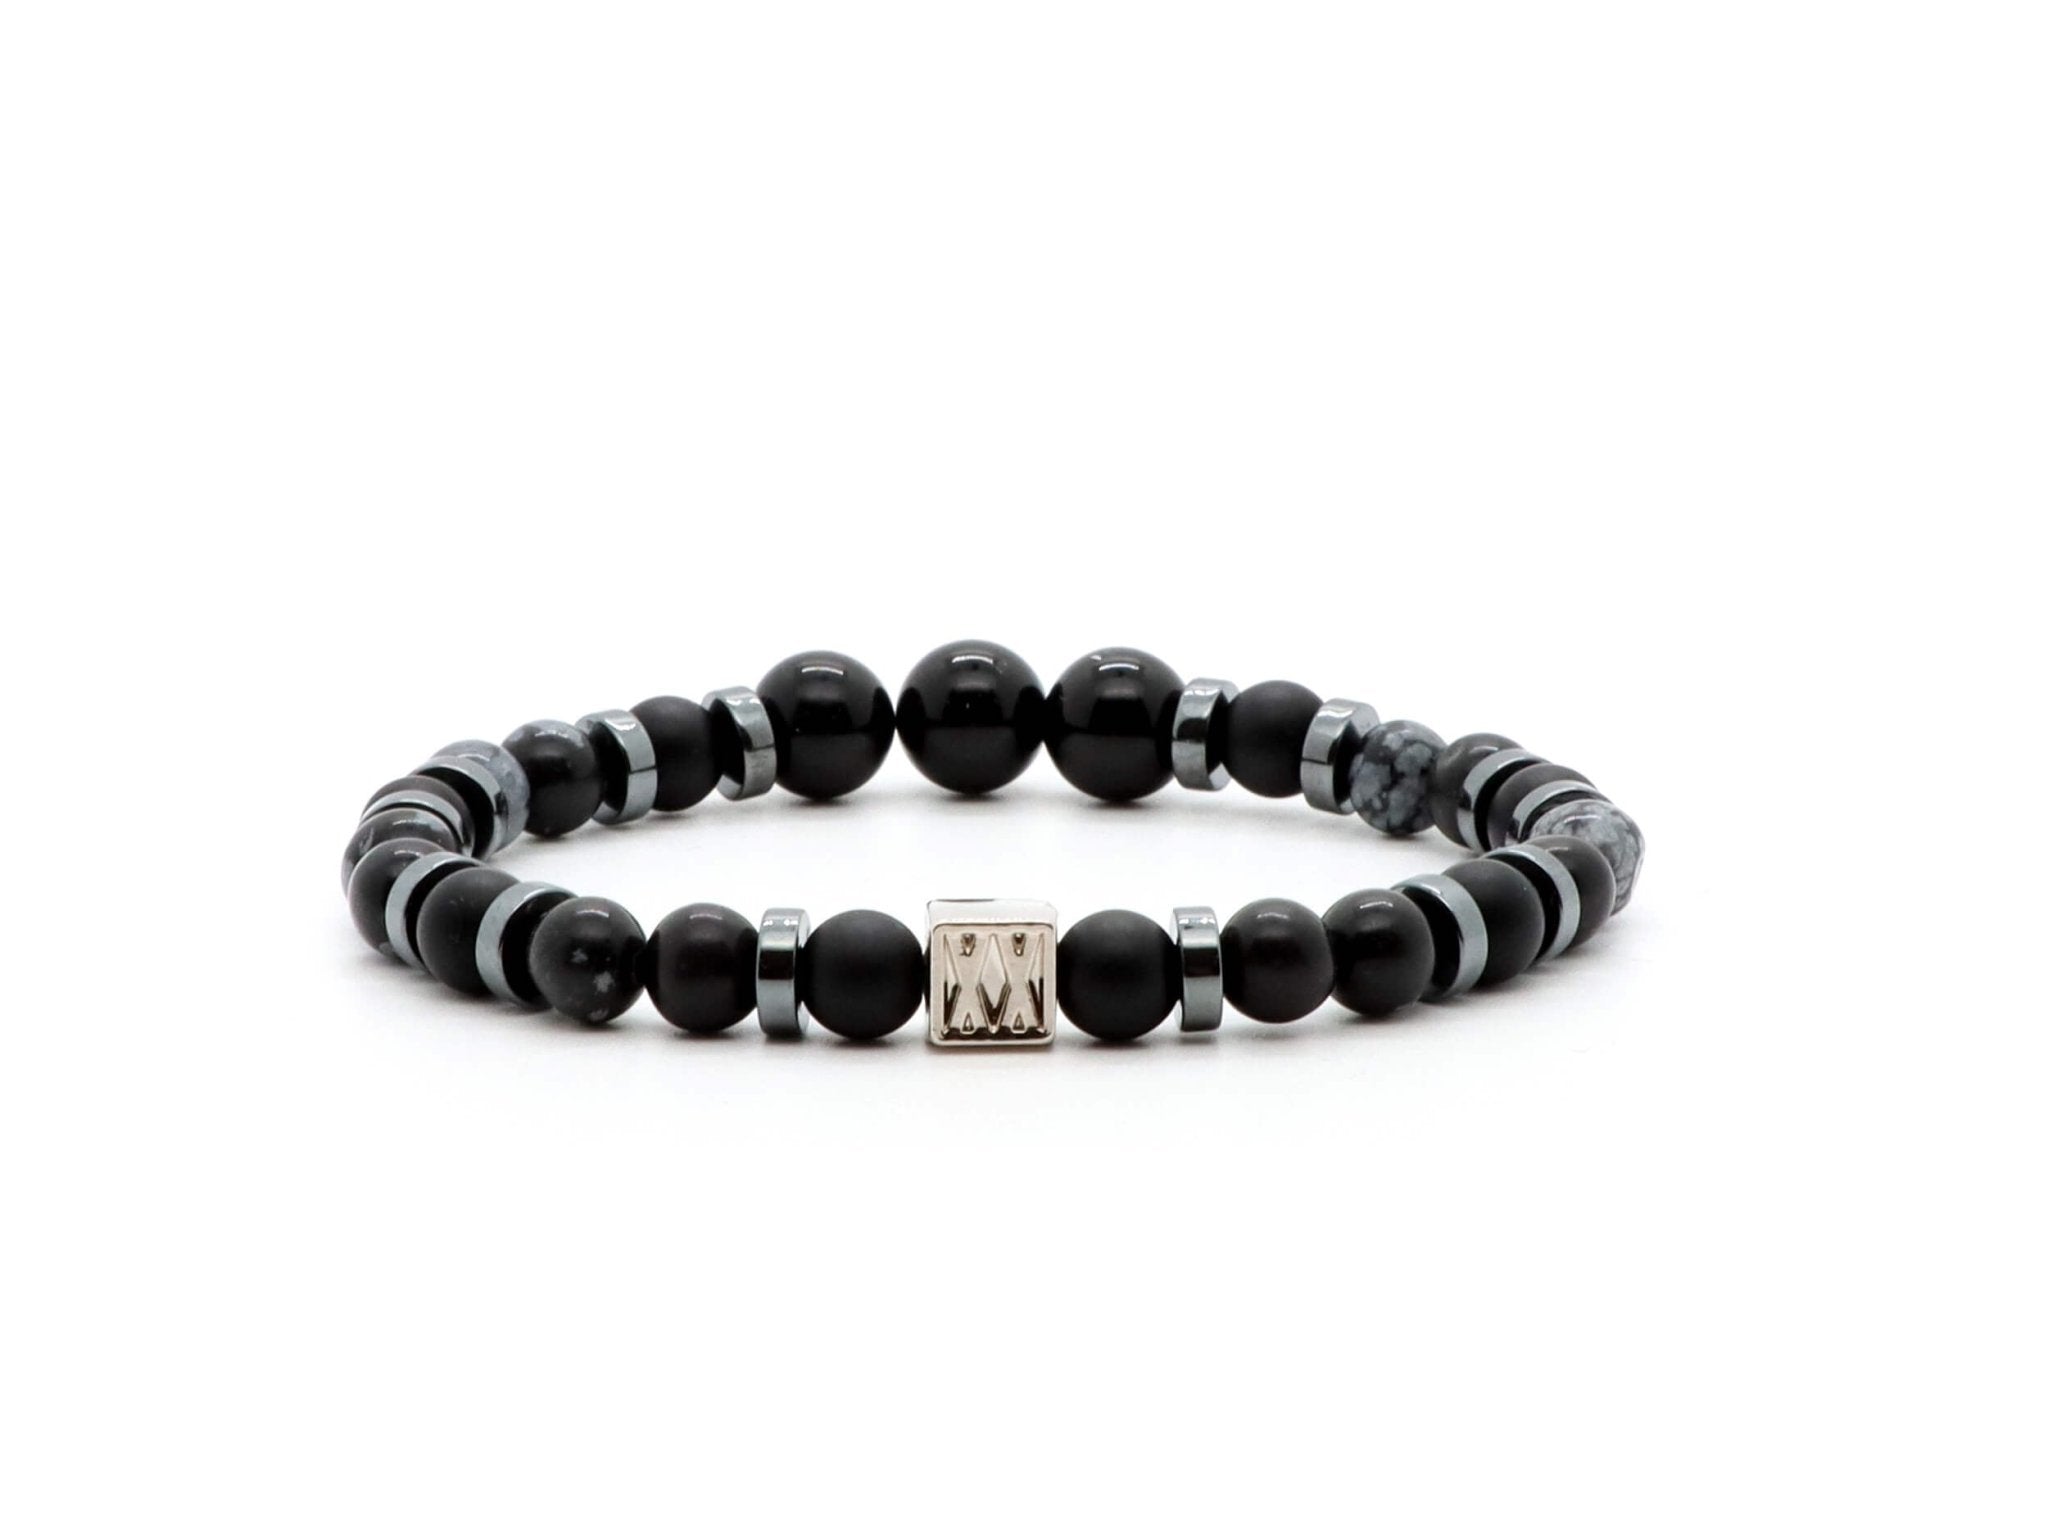 Ladies bracelet with Snowflake Obsidian and Black Agate beads | Natural stone